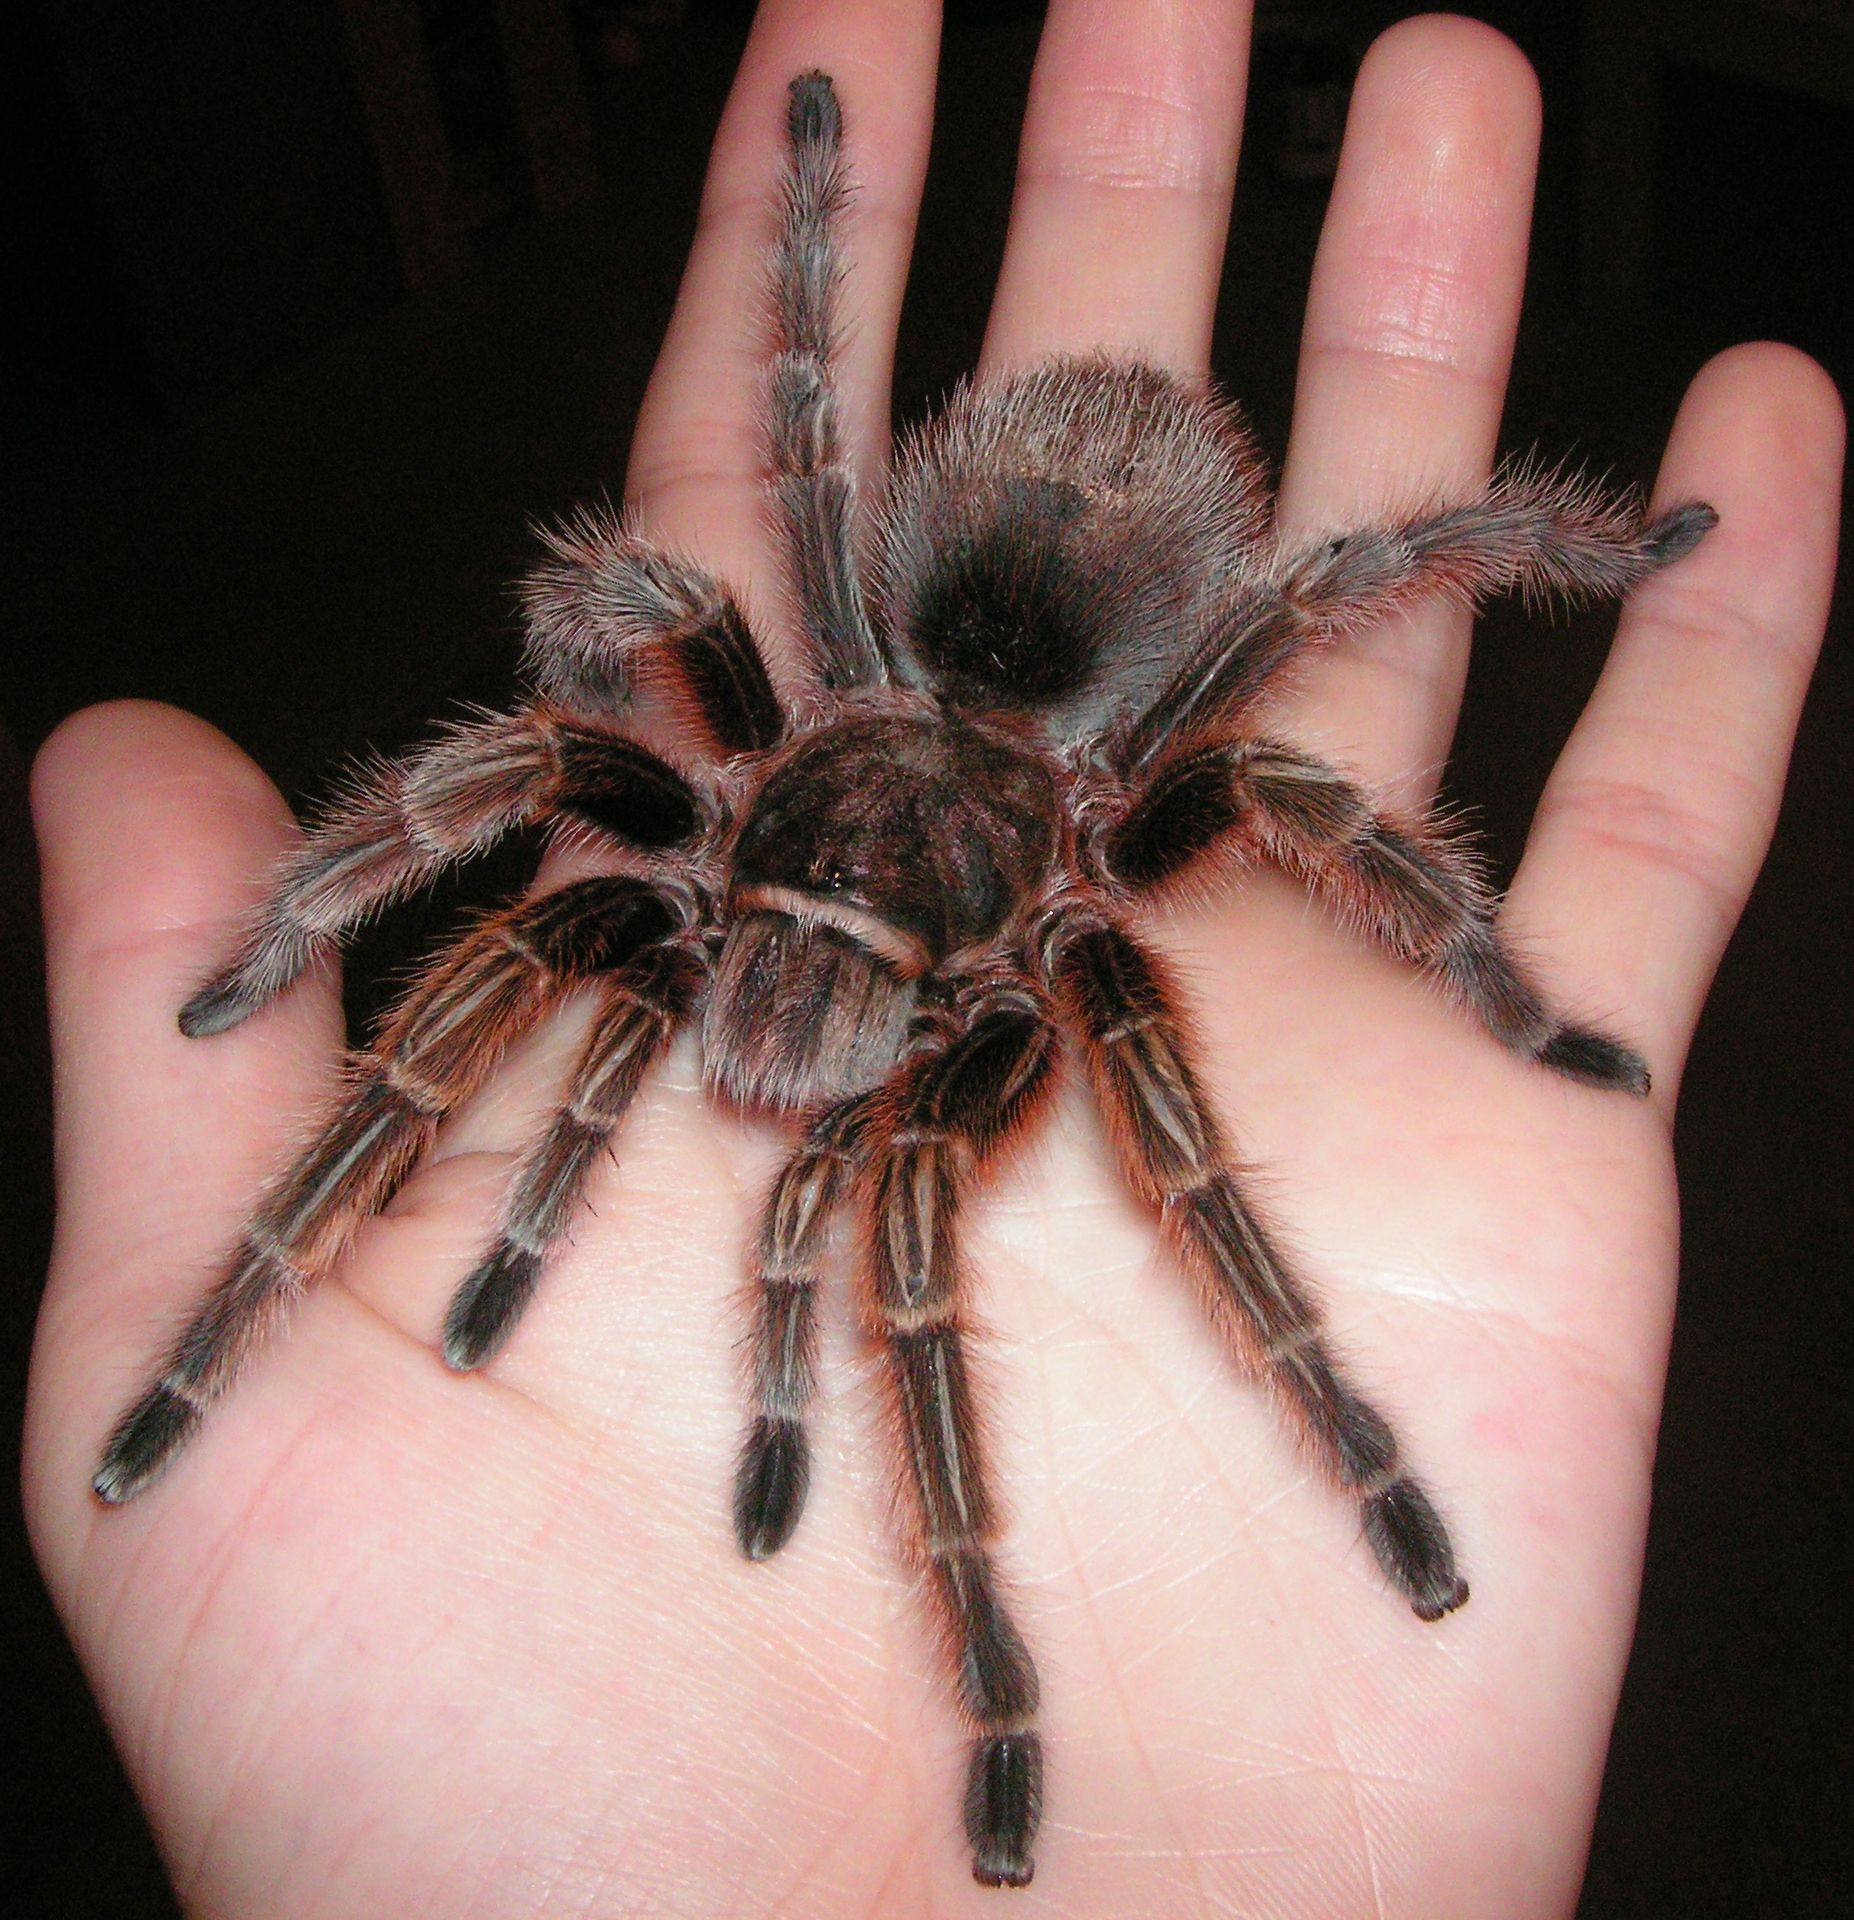 Rose Hair Tarantuala from Chile. I held one a few days ago and loved ...